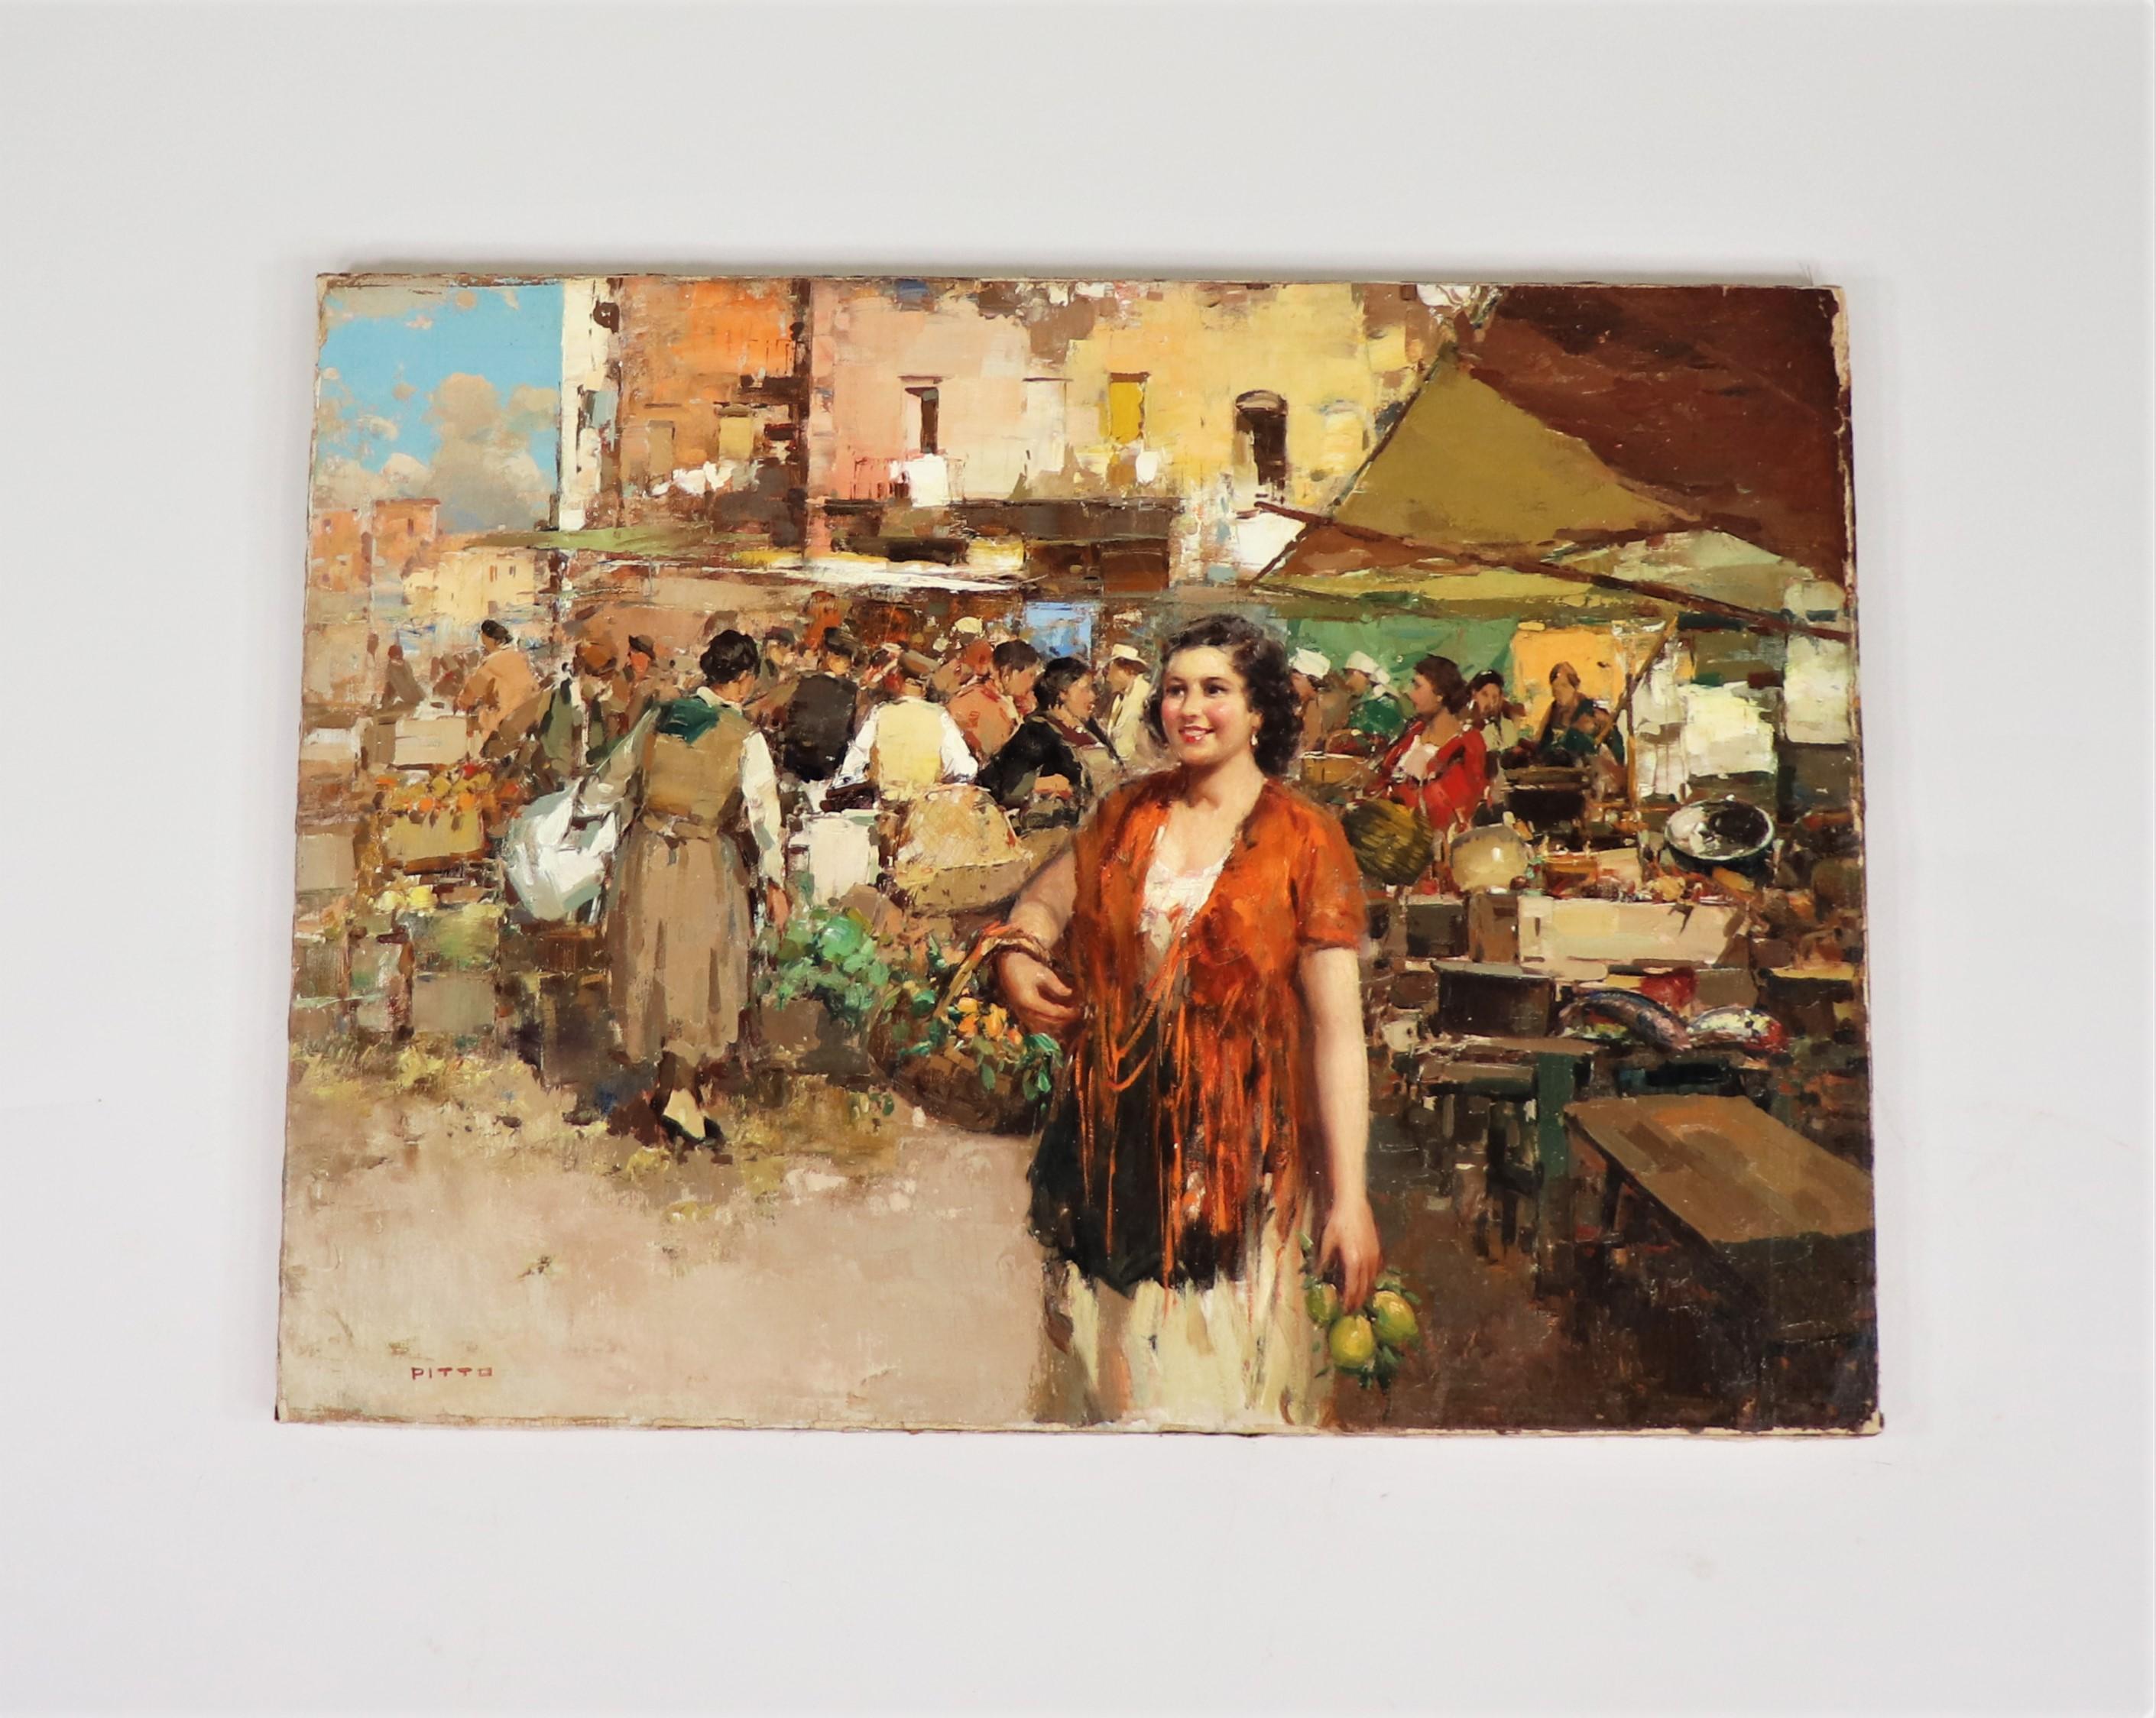 Giuseppe Pitto (Italian 1857 - 1928) is often known for his paintings depicting pretty women in Italian street markets. This exuberantly painted scene is done in the realist style. Realism emerged as a major art movement from 1840 to 1900. It was a